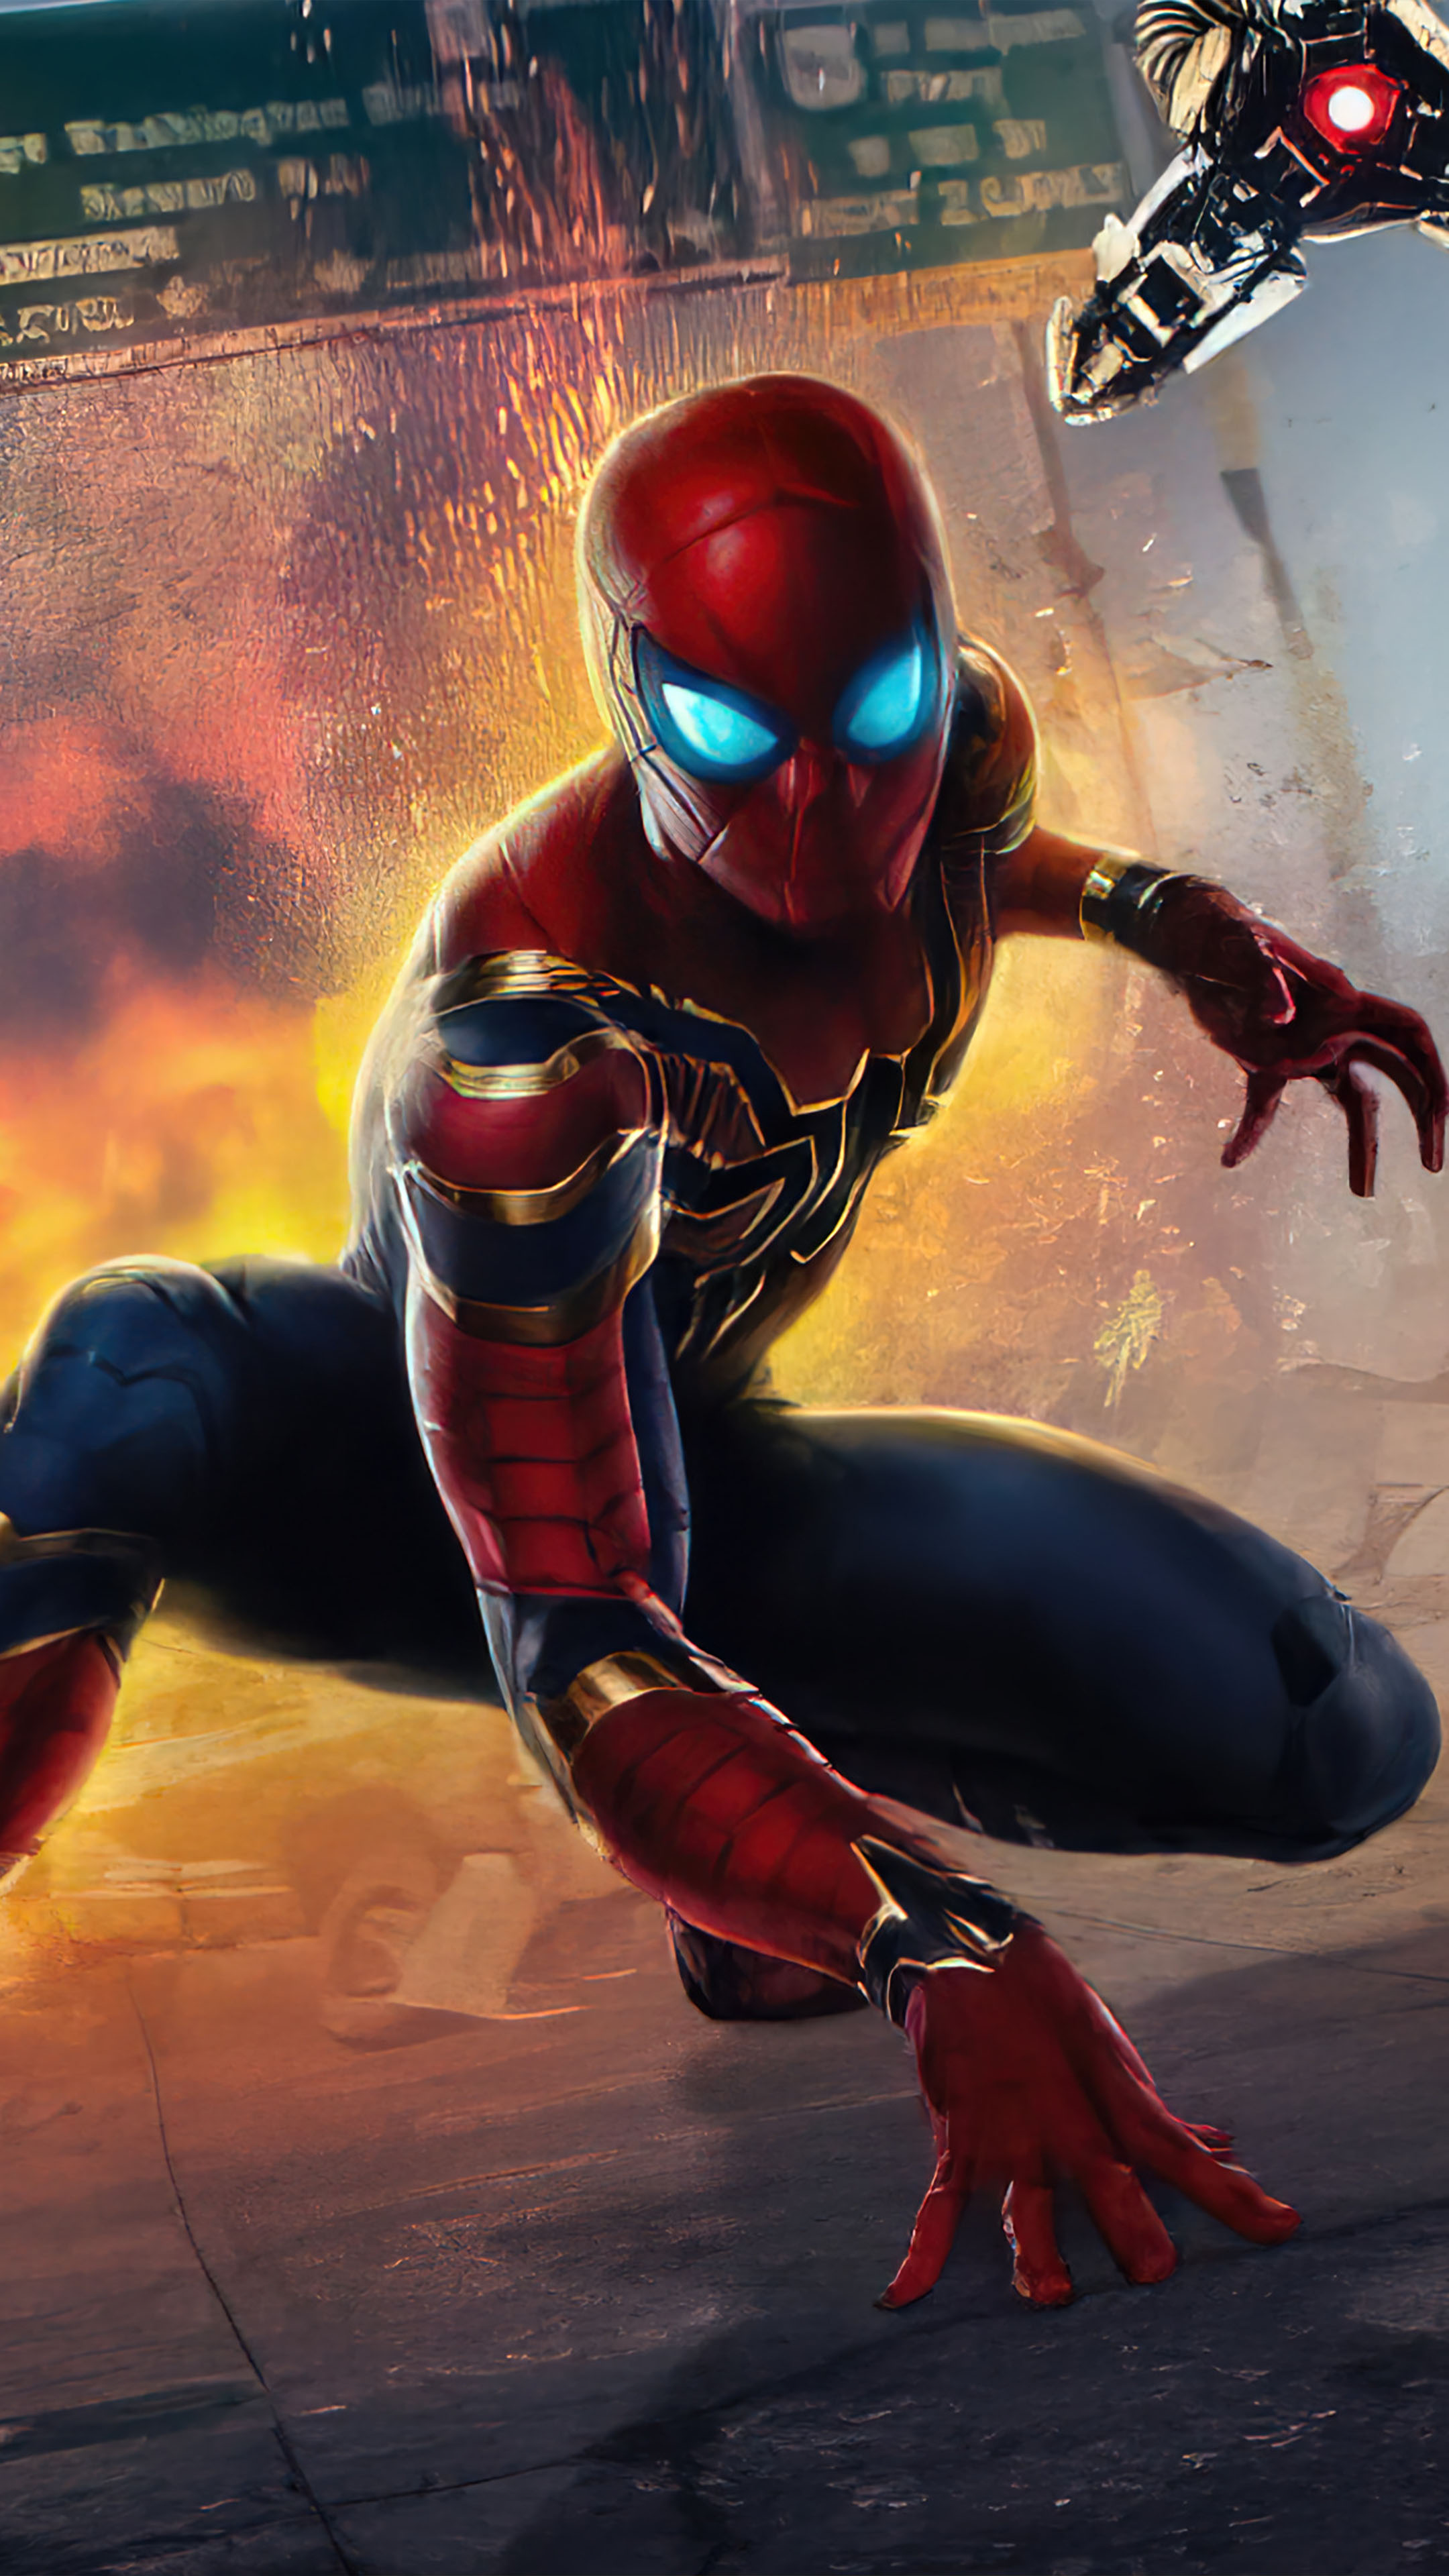 Spider Man Wallpapers  Top 125 Best Spiderman Wallpapers  HQ 